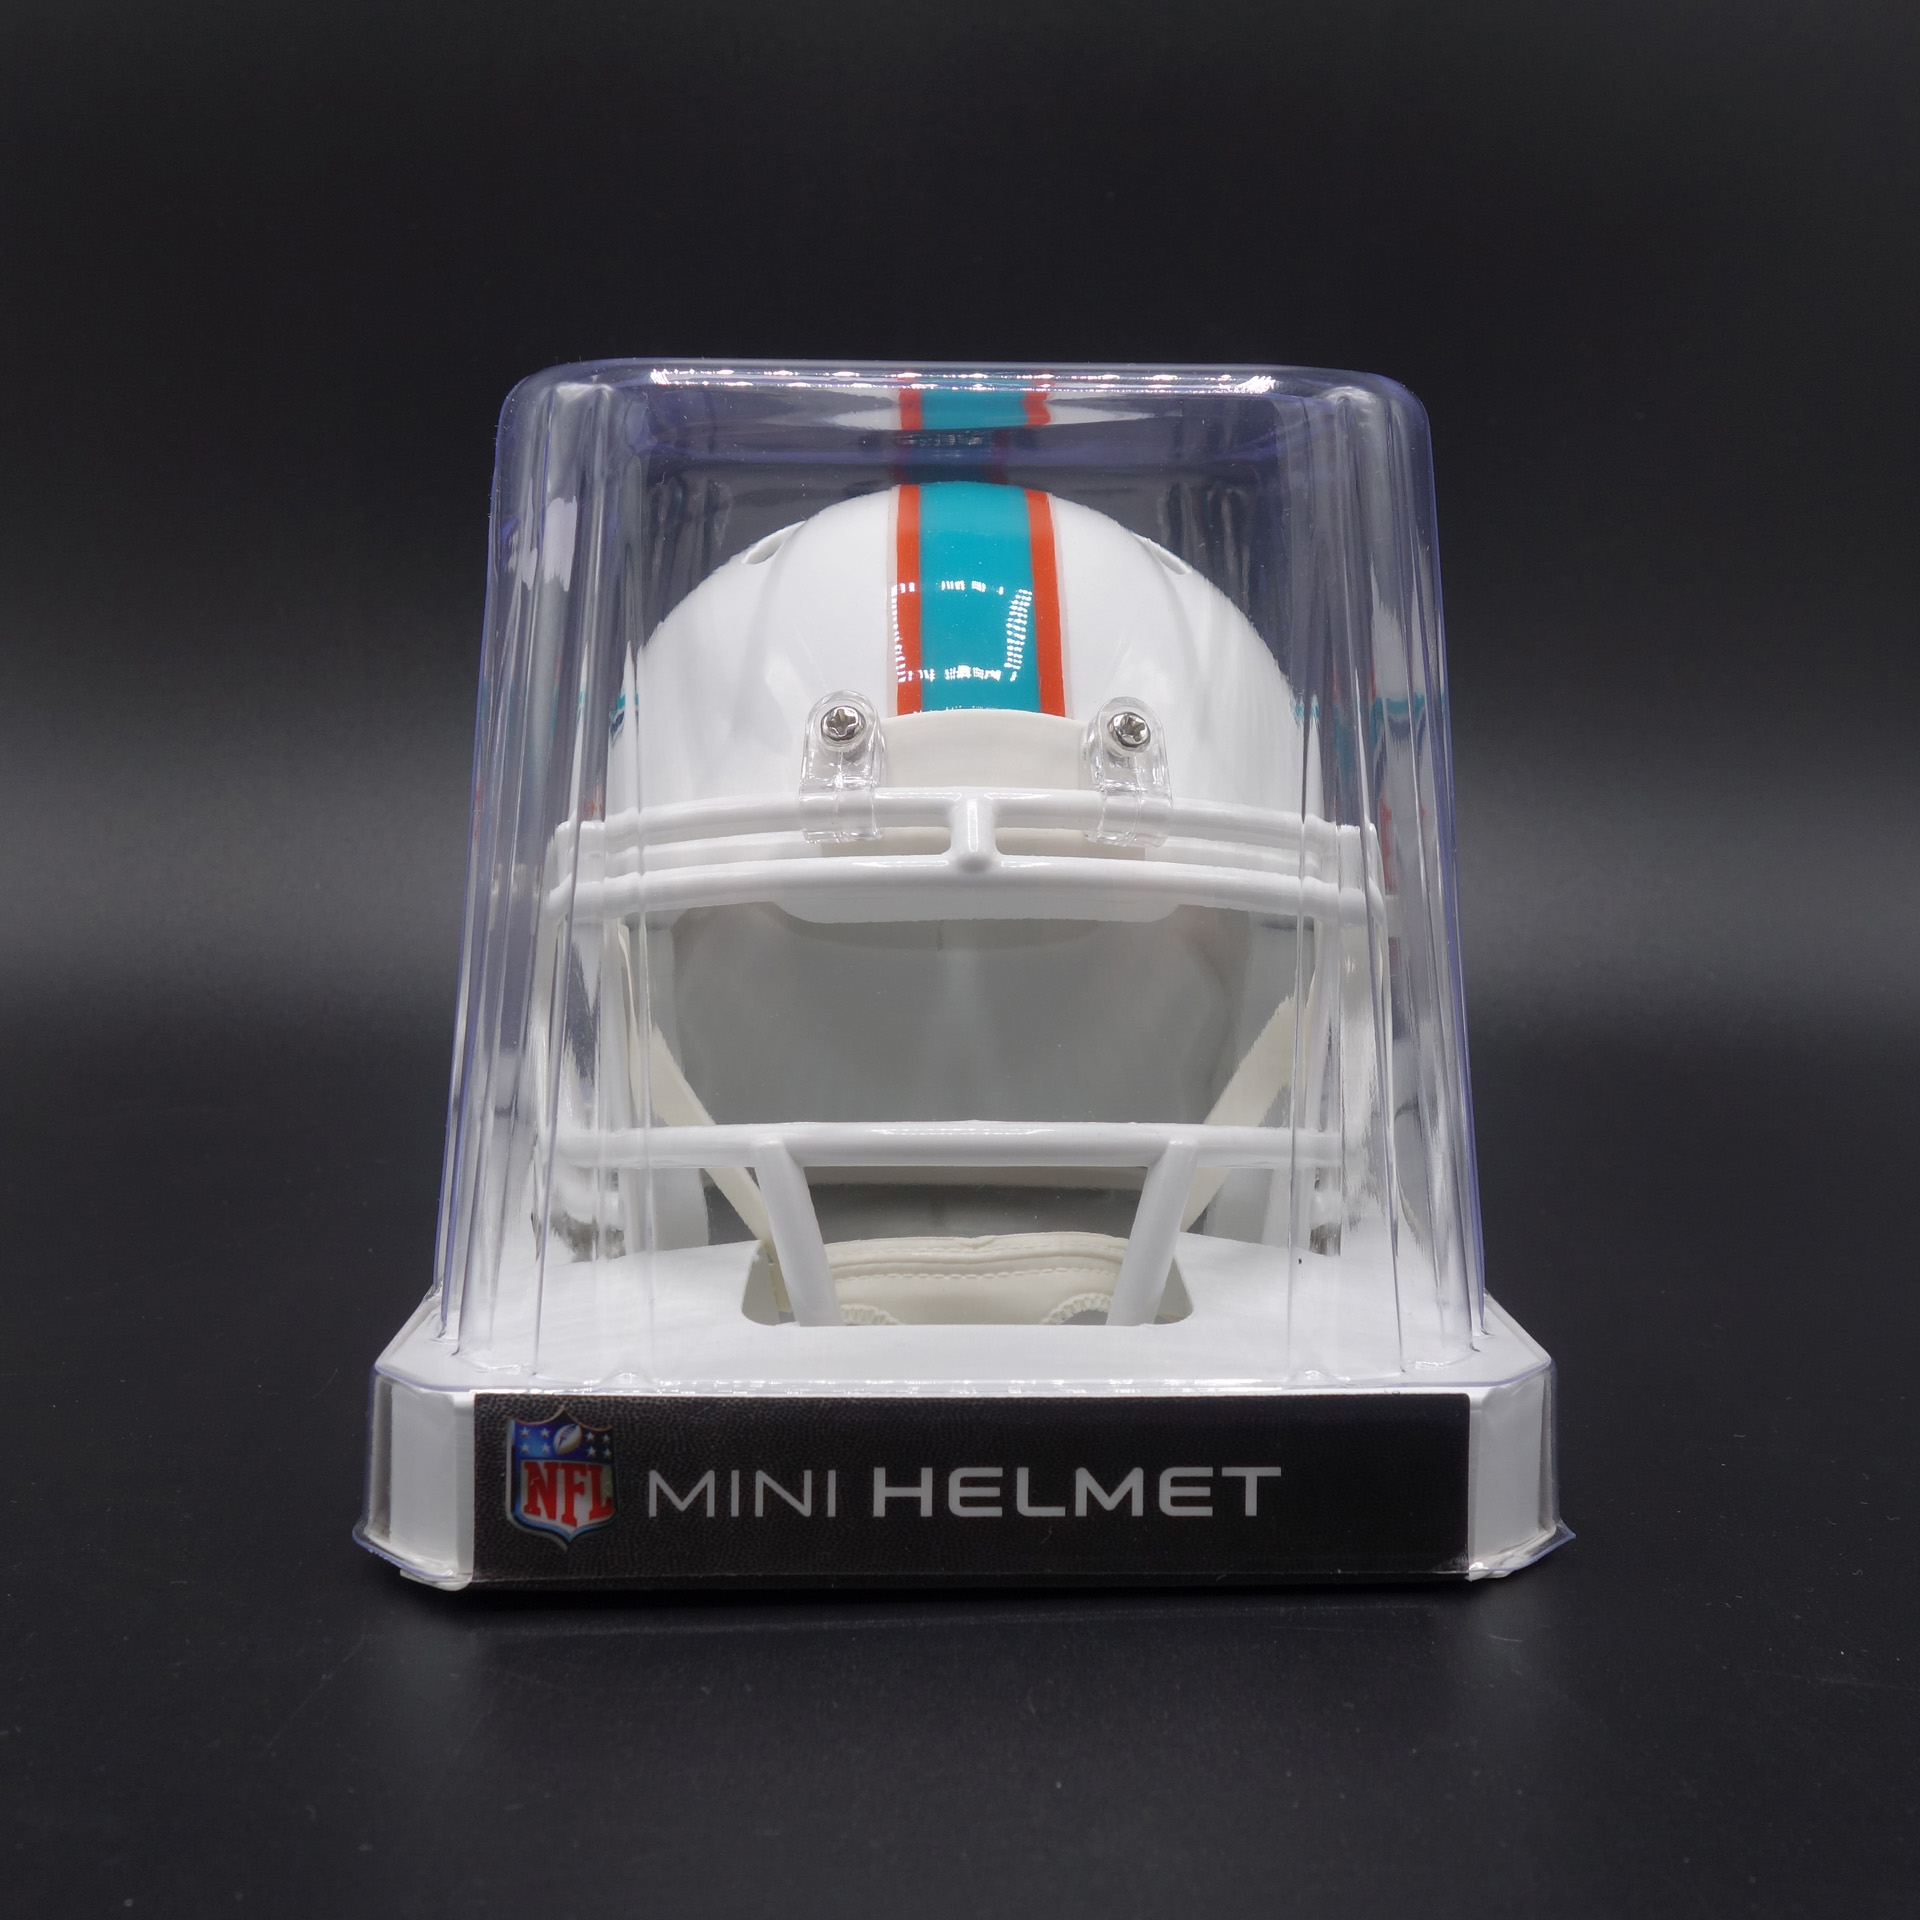 NFL Miami Dolphins Riddell Helm Speed